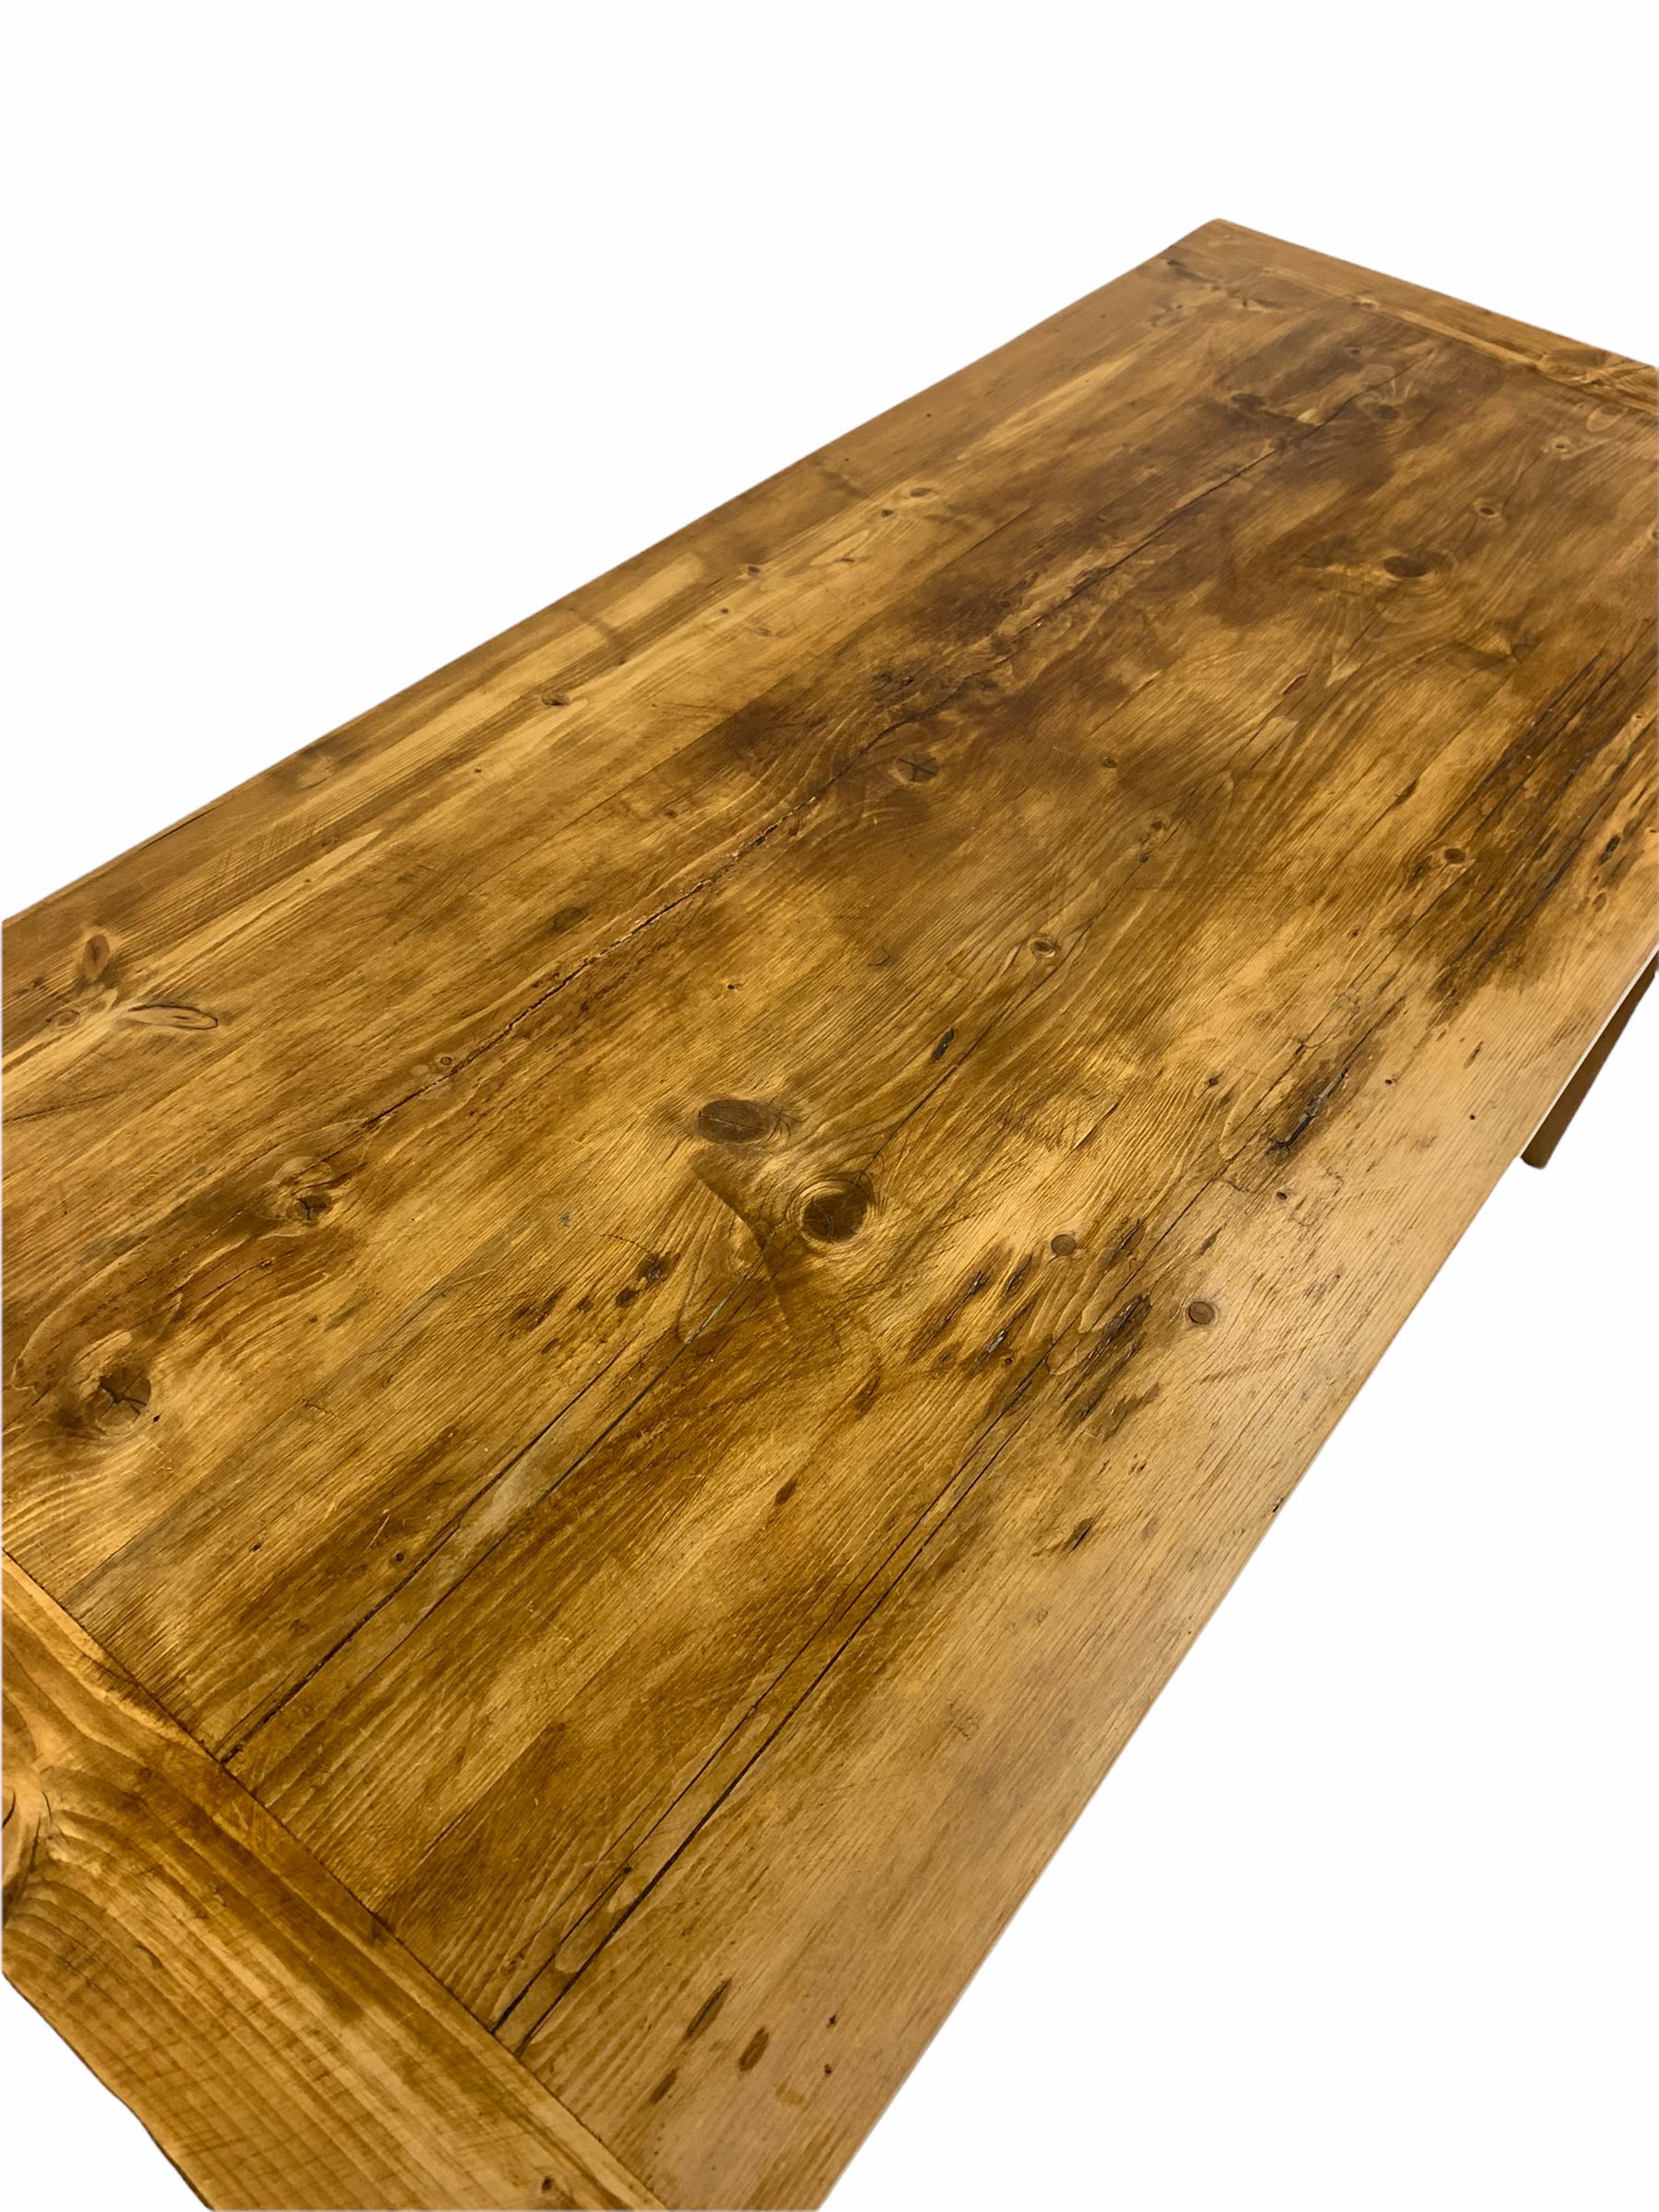 Farmhouse pine dining table - Image 4 of 4